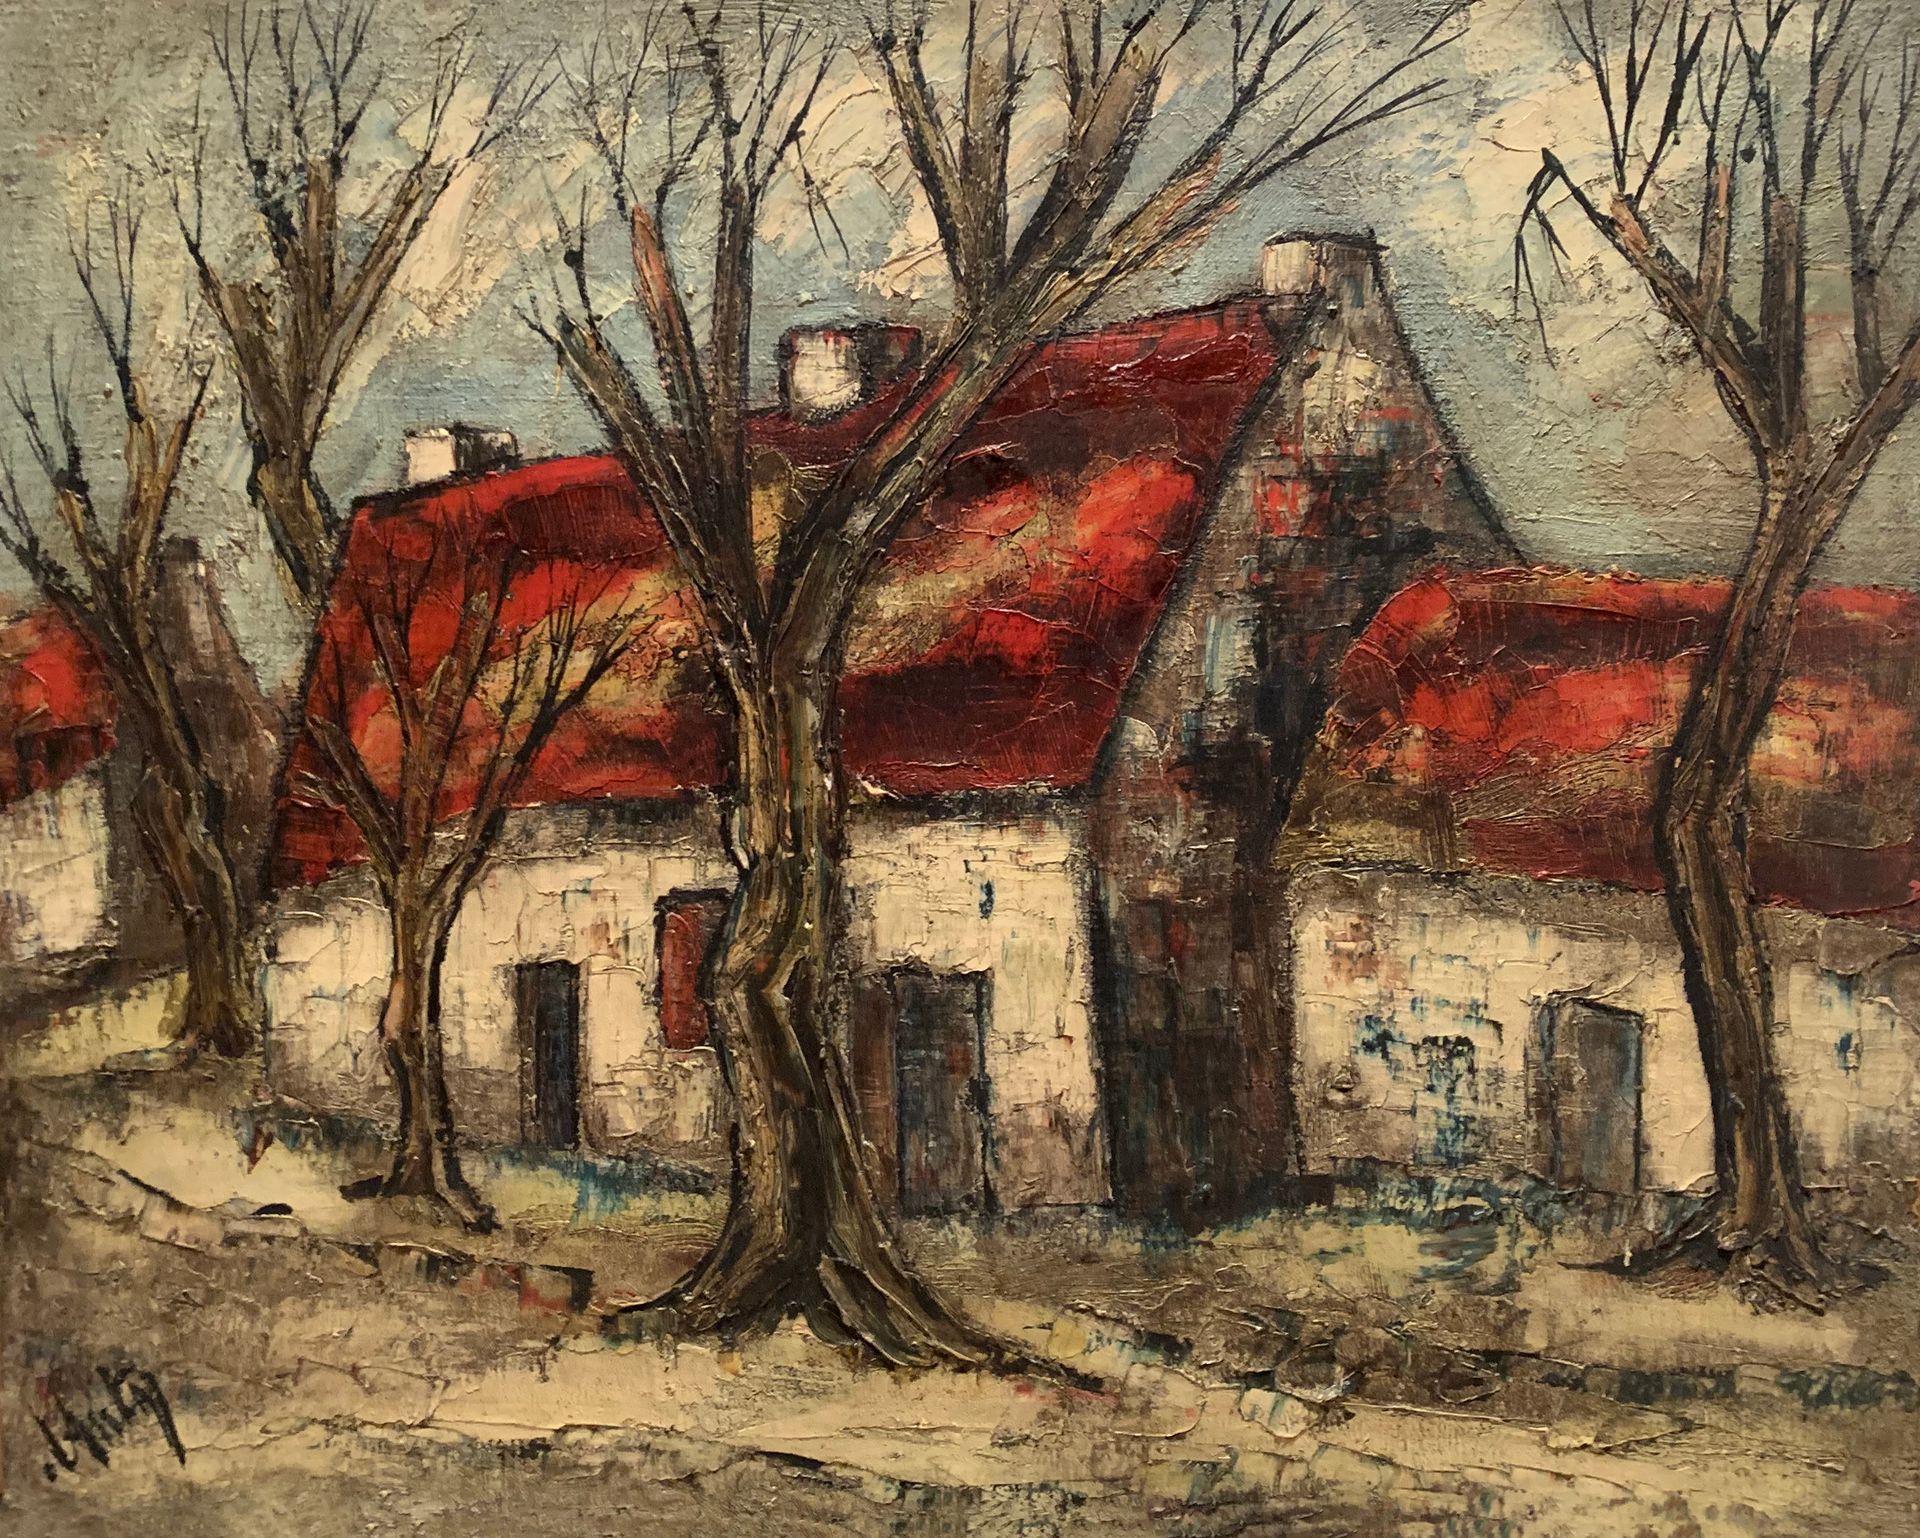 Null Henry Maurice D'ANTY (1910-1998)

Casa con tetto rosso

Olio su tela firmat&hellip;